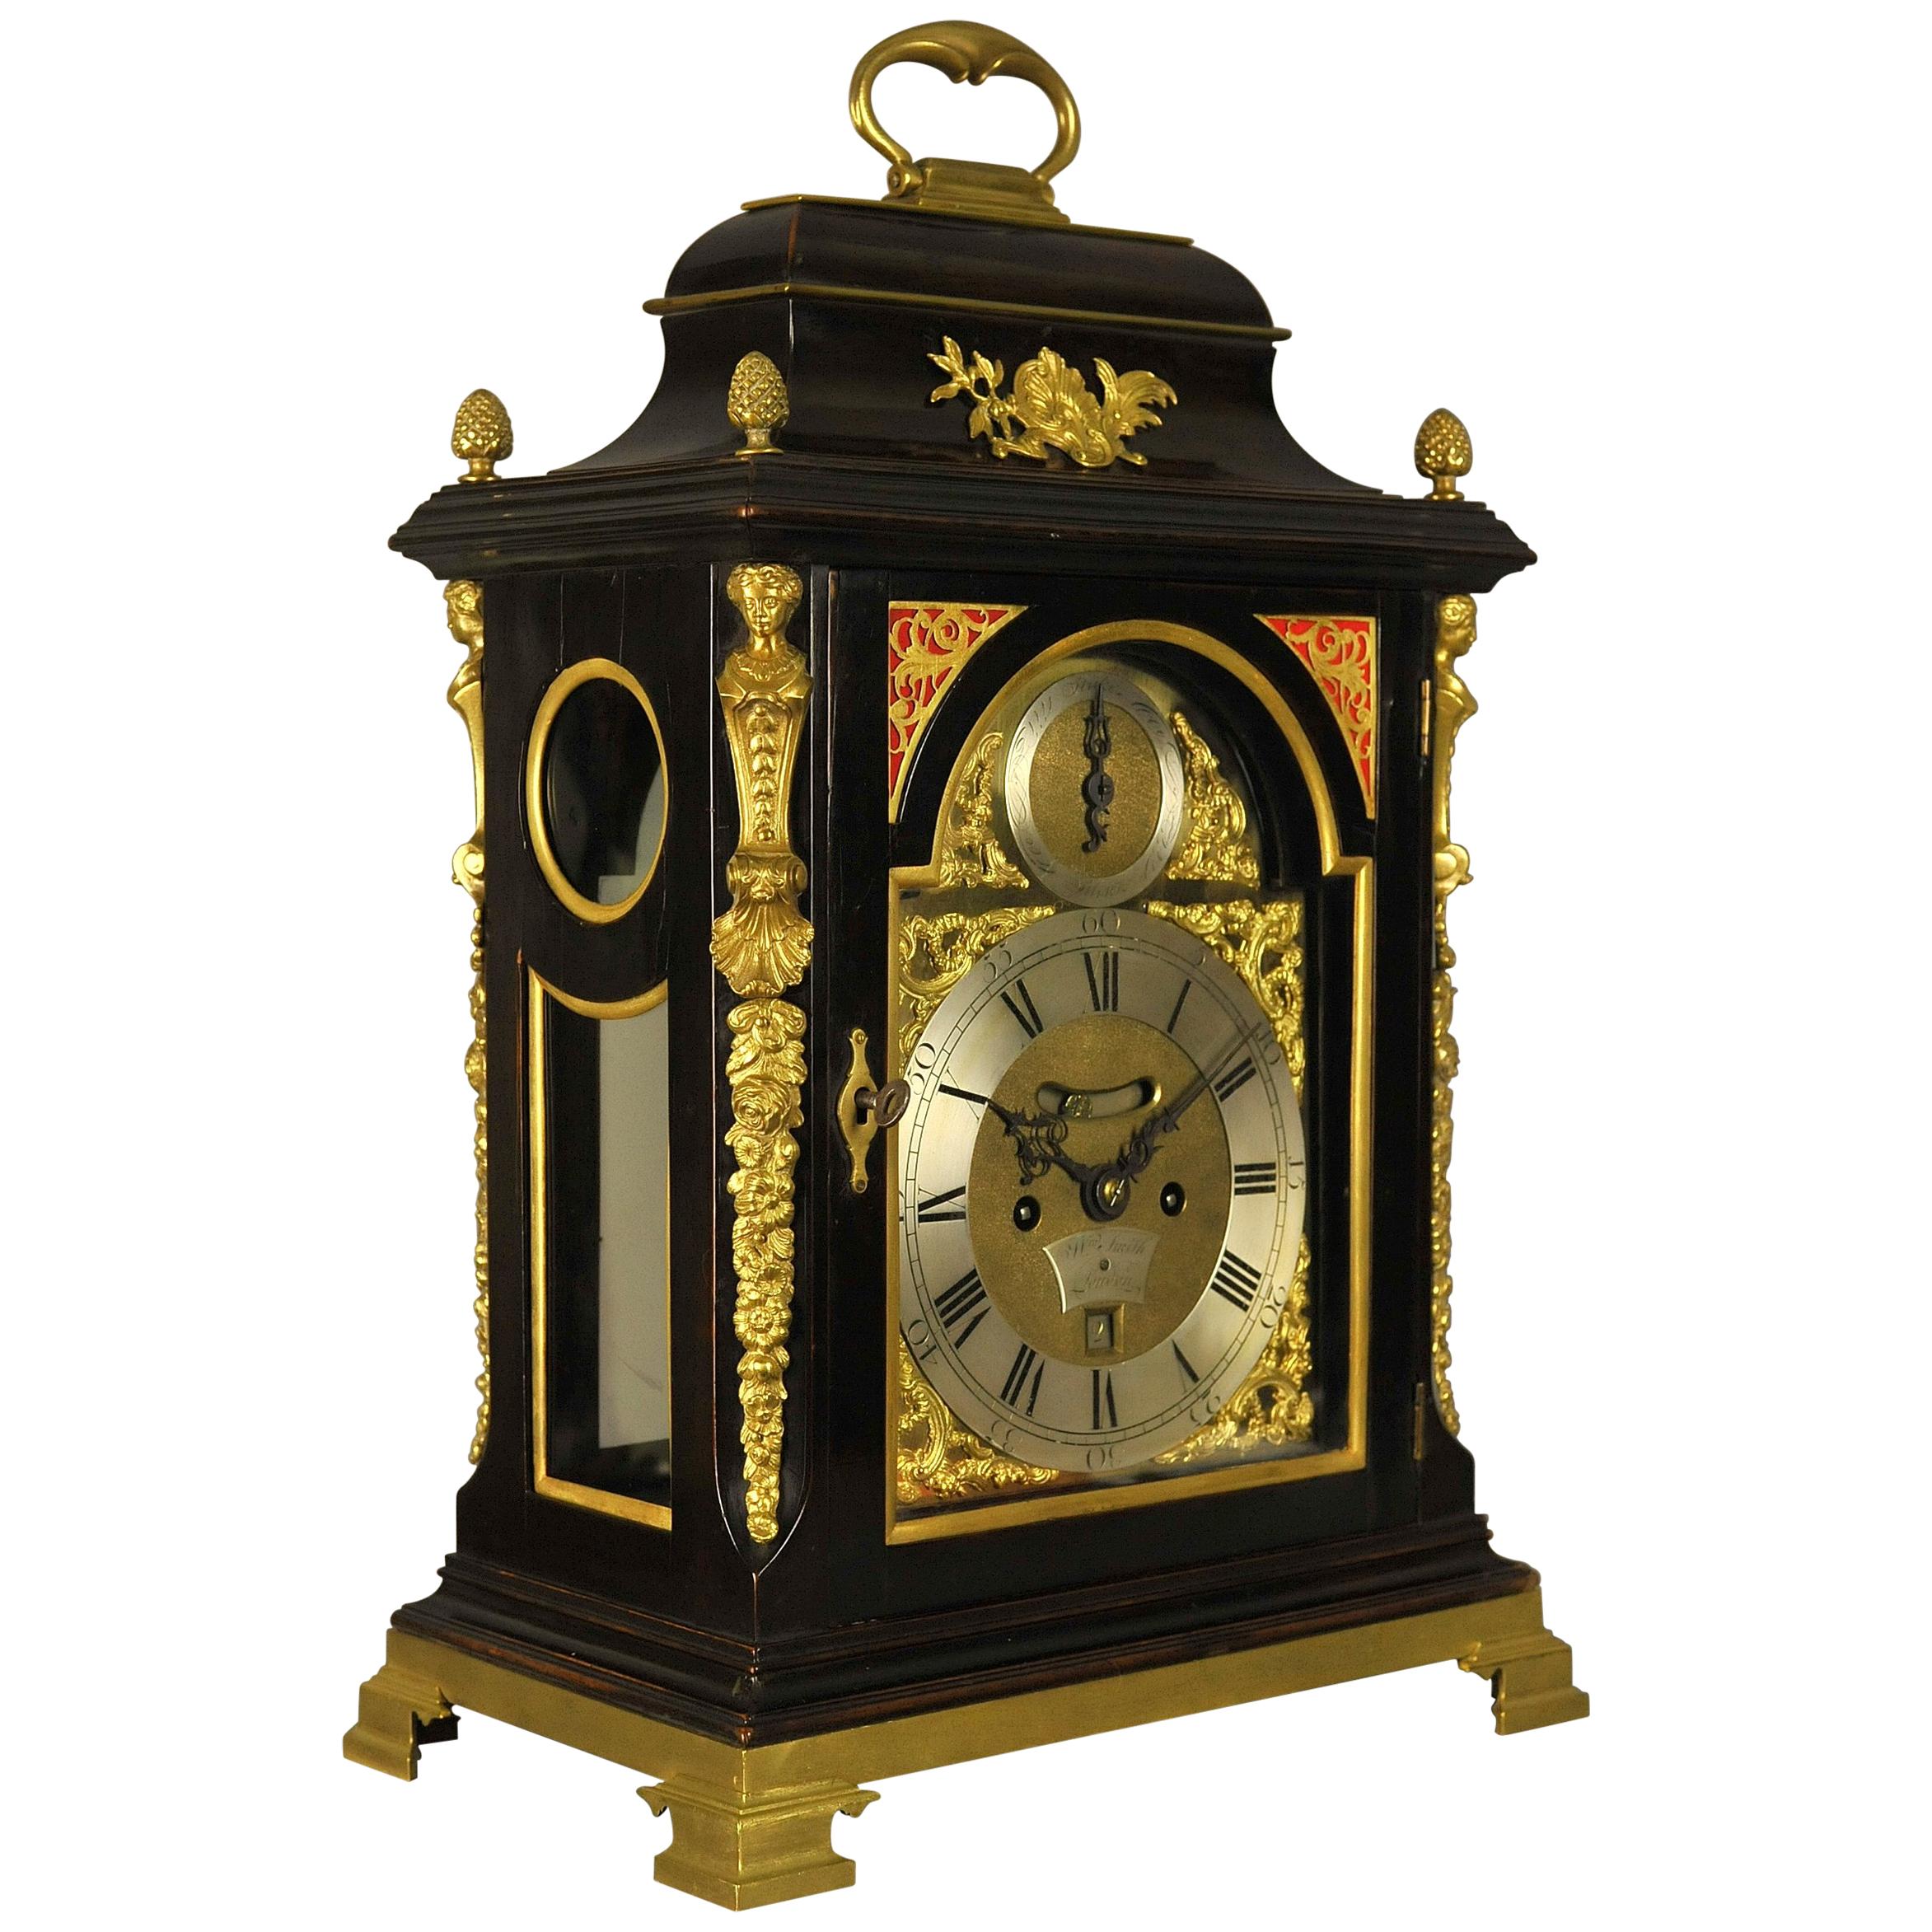 Verge Fusee Bracket Clock, William Smith, London For Sale